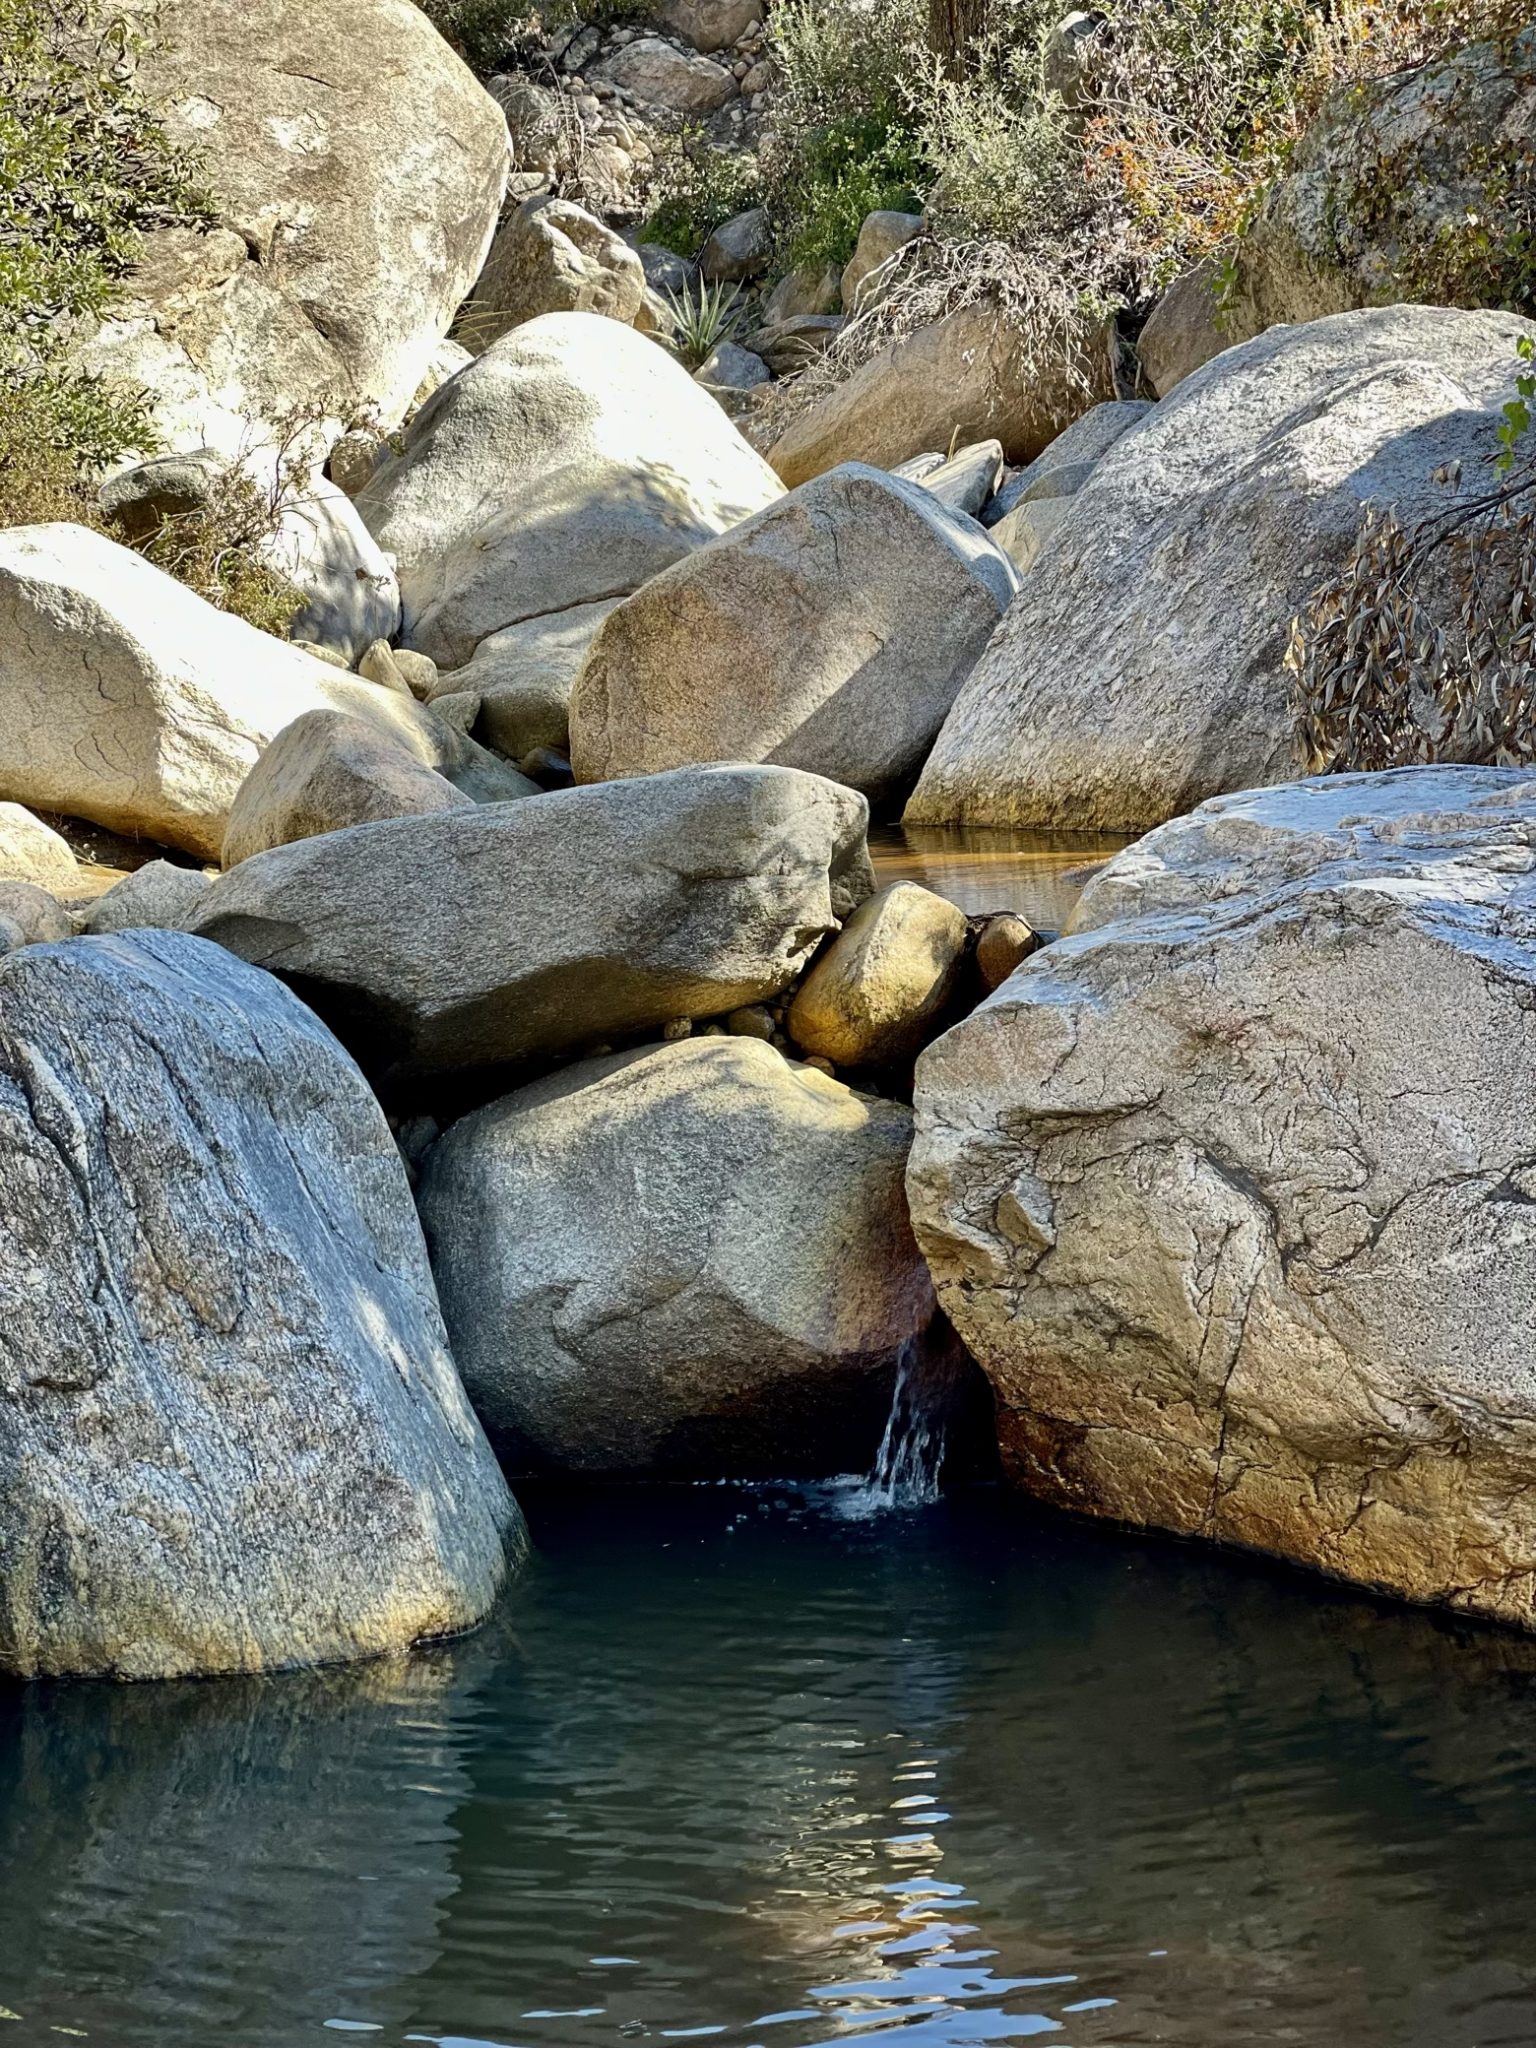 Flowing water amid the boulders